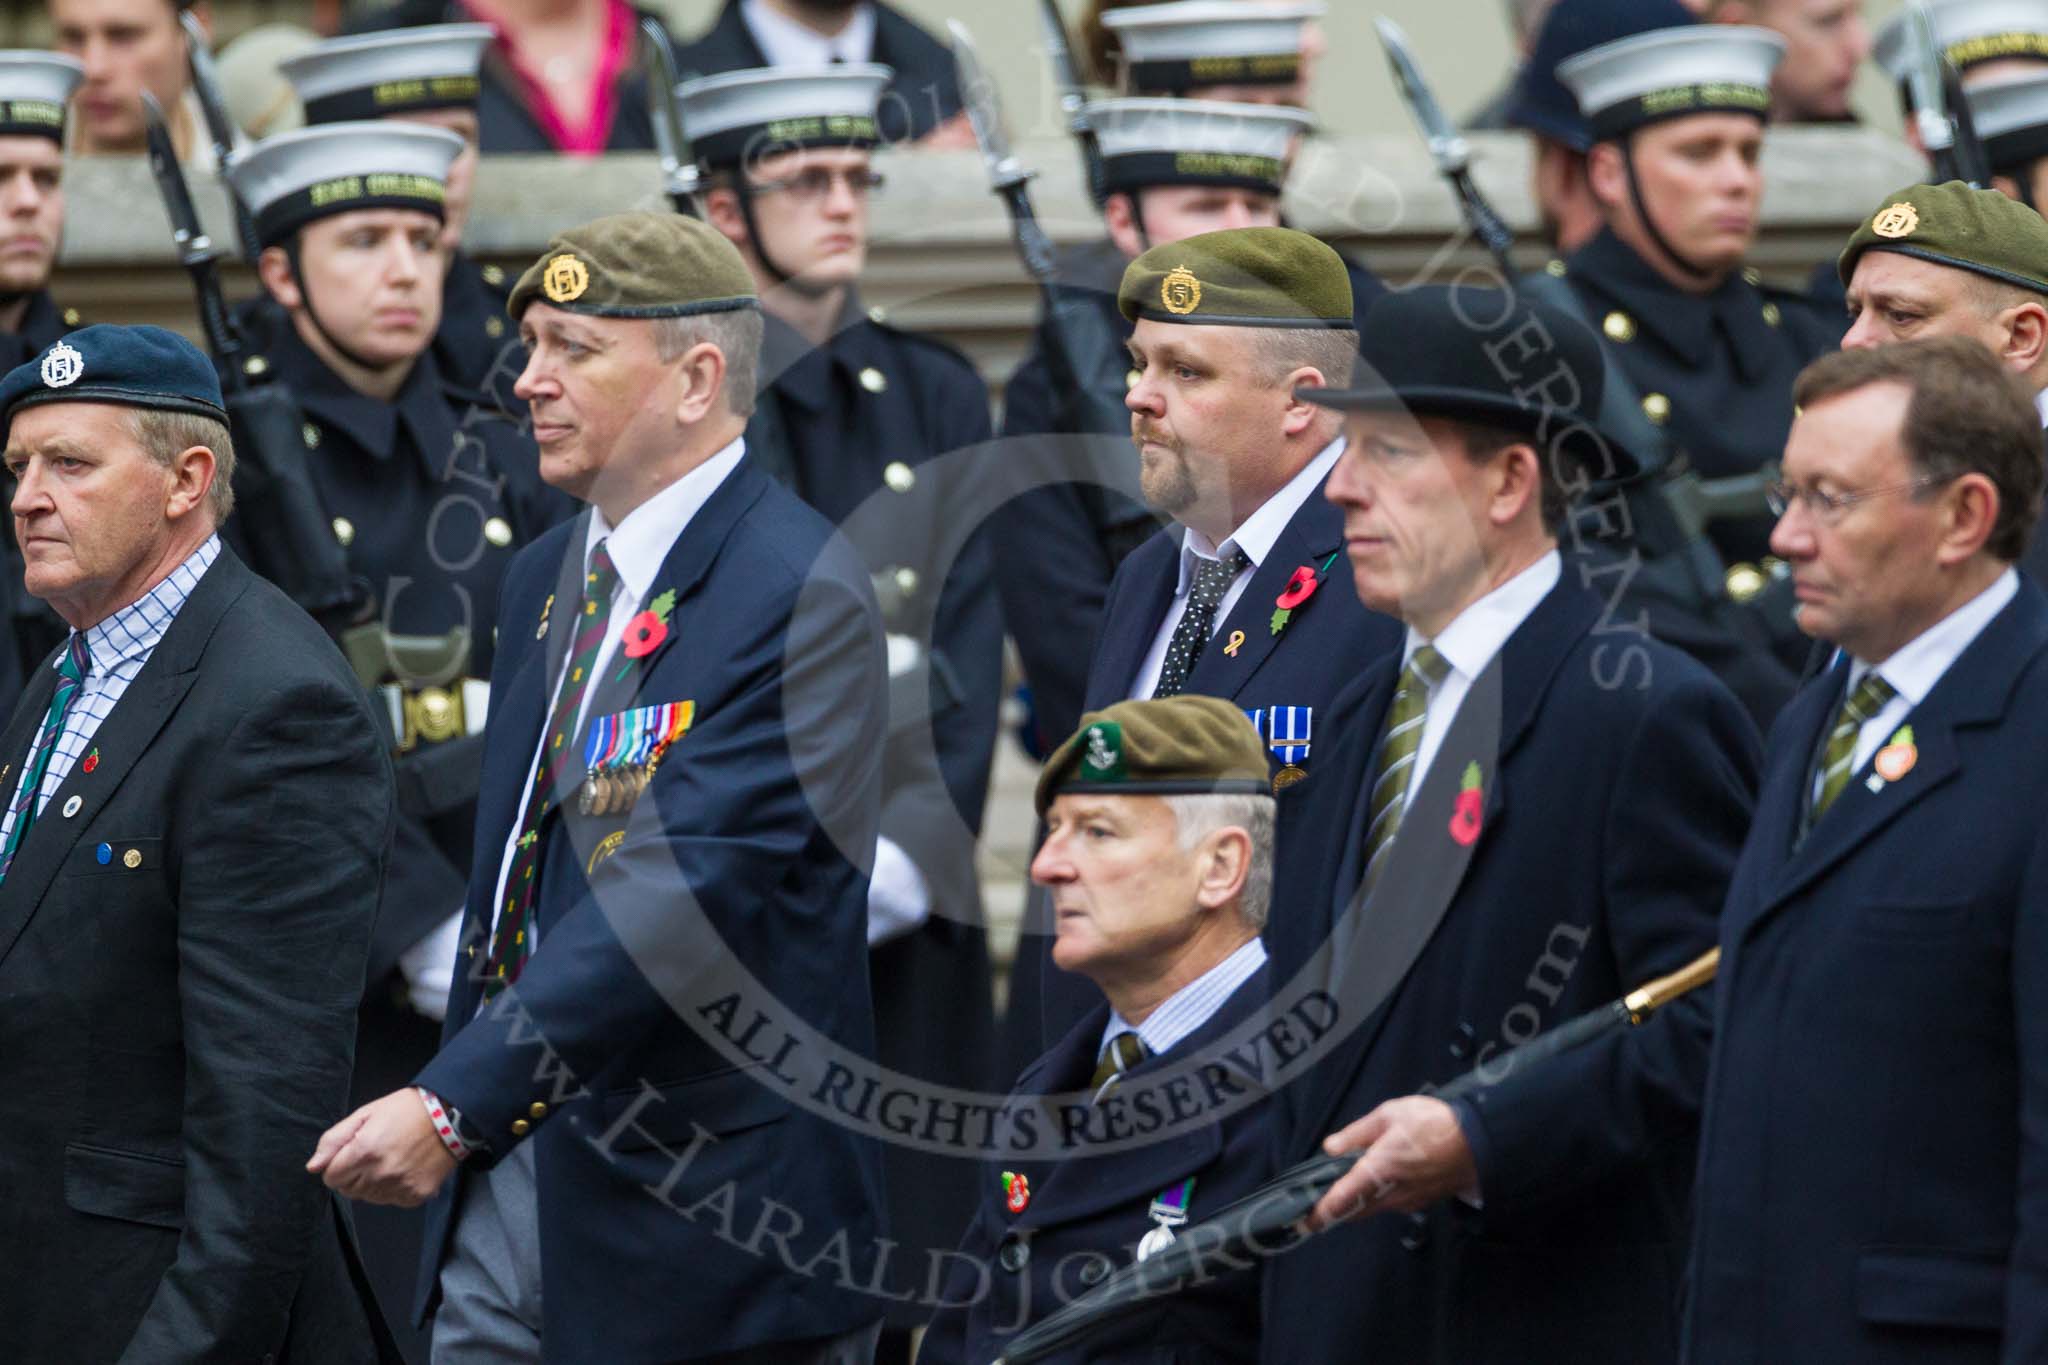 Remembrance Sunday at the Cenotaph 2015: Group A22, Green Howards Association.
Cenotaph, Whitehall, London SW1,
London,
Greater London,
United Kingdom,
on 08 November 2015 at 12:12, image #1344